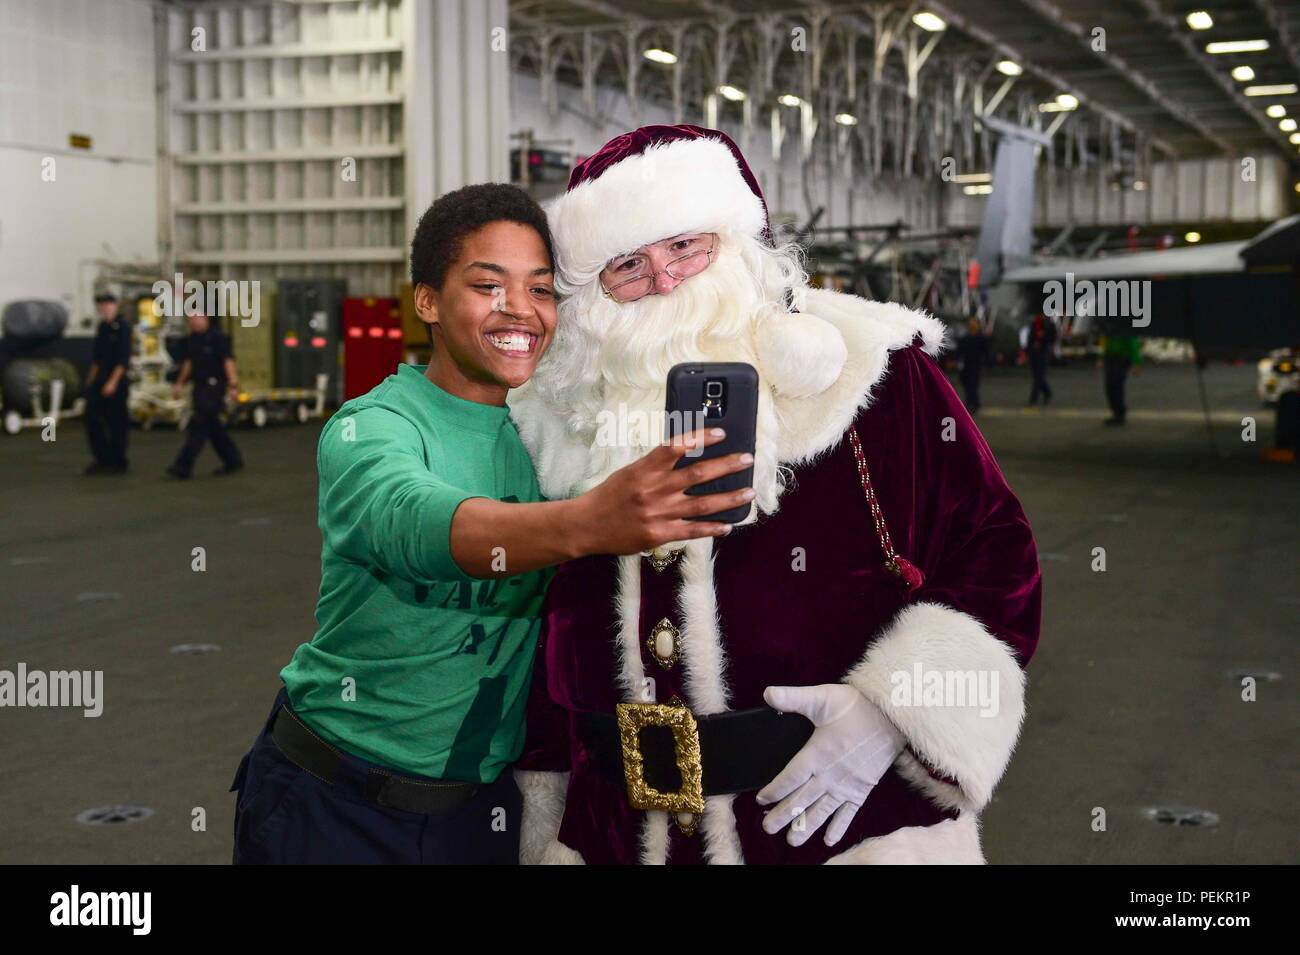 151213-N-BH414-052  ATLANTIC OCEAN (Dec. 13, 2015) – A Sailor assigned to the Zappers of Electronic Attack Squadron (VAQ) 130 poses for a selfie with Santa Claus in the hangar bay of the aircraft carrier USS Dwight D. Eisenhower (CVN 69). Dwight D. Eisenhower and embarked Carrier Air Wing 3 are underway preparing for their upcoming deployment. (U.S. Navy photo by Mass Communication Specialist Seaman Apprentice Casey S. Trietsch/Released) Stock Photo